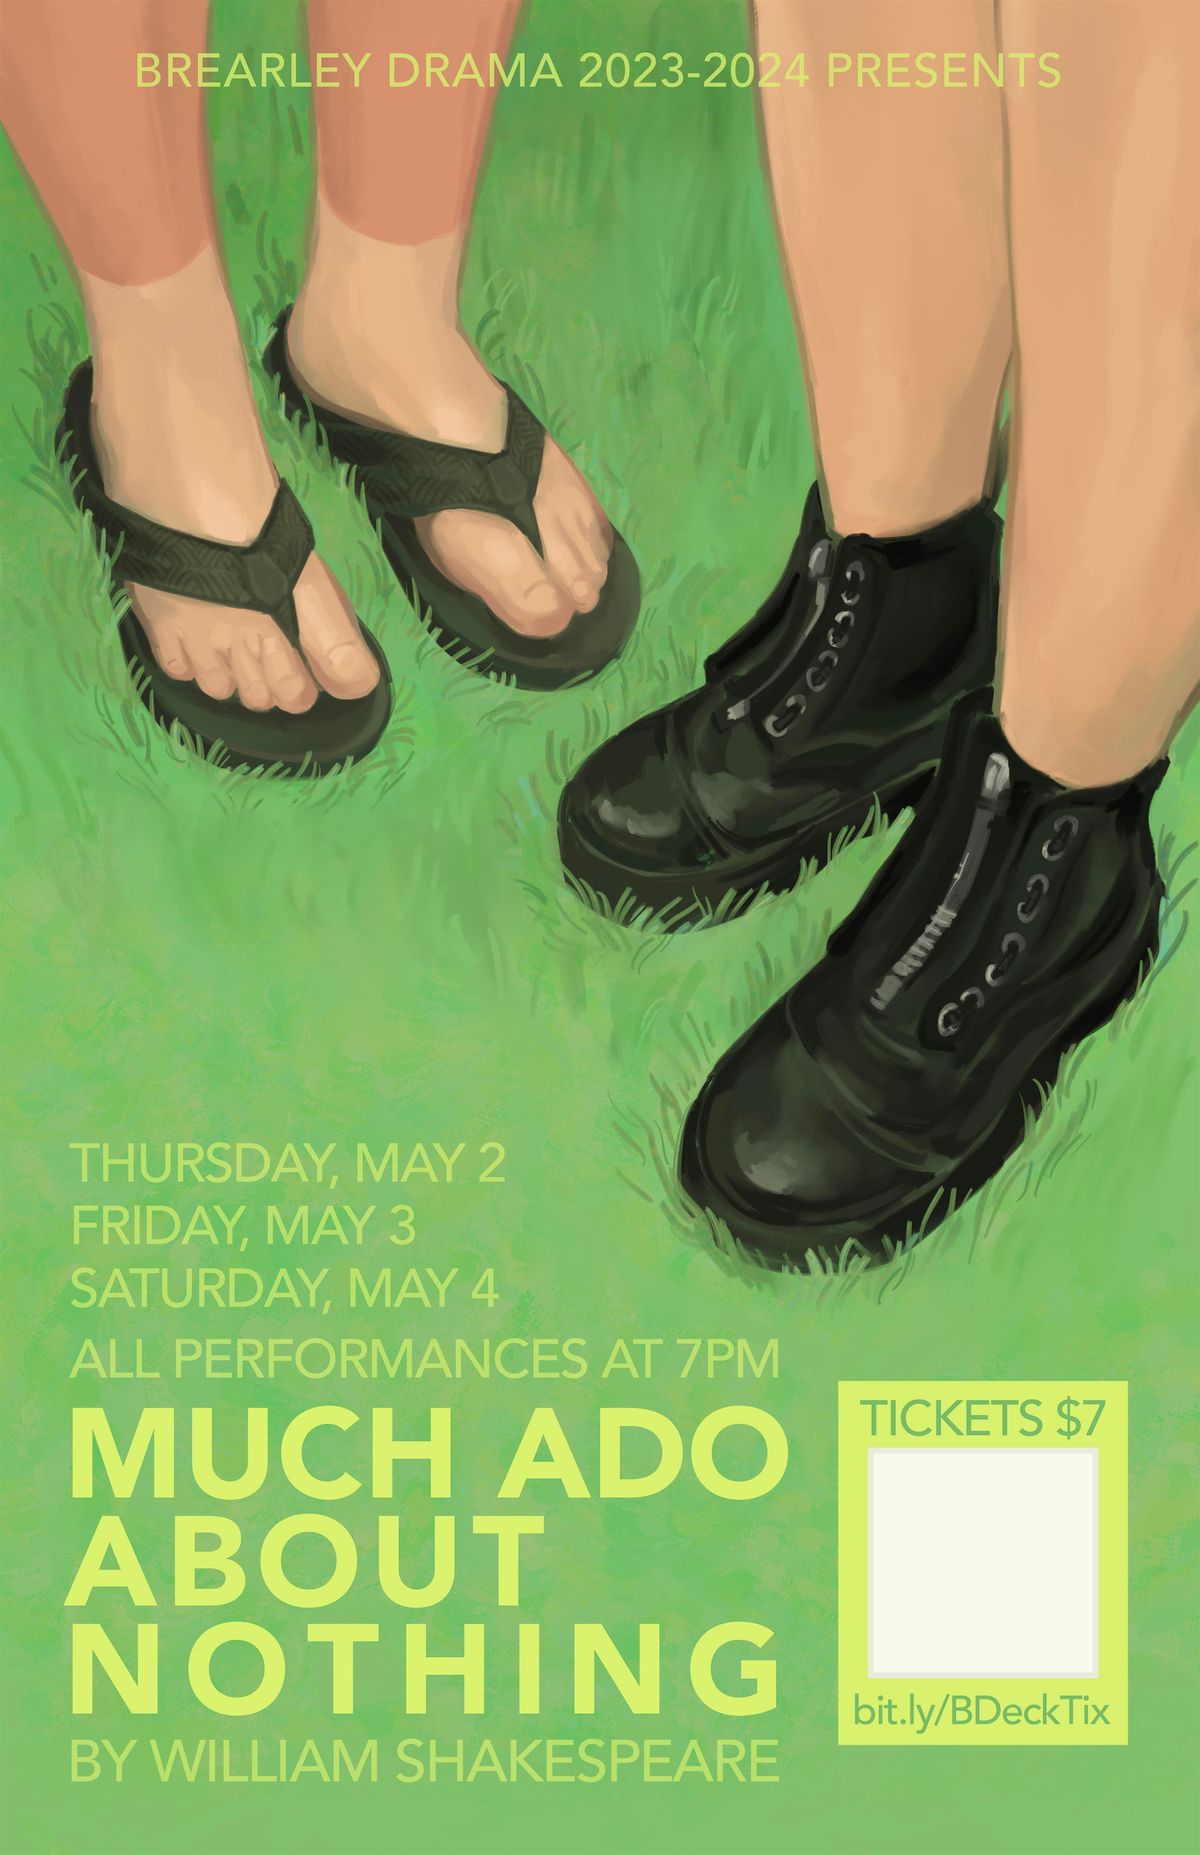 Much Ado About Nothing - Thursday